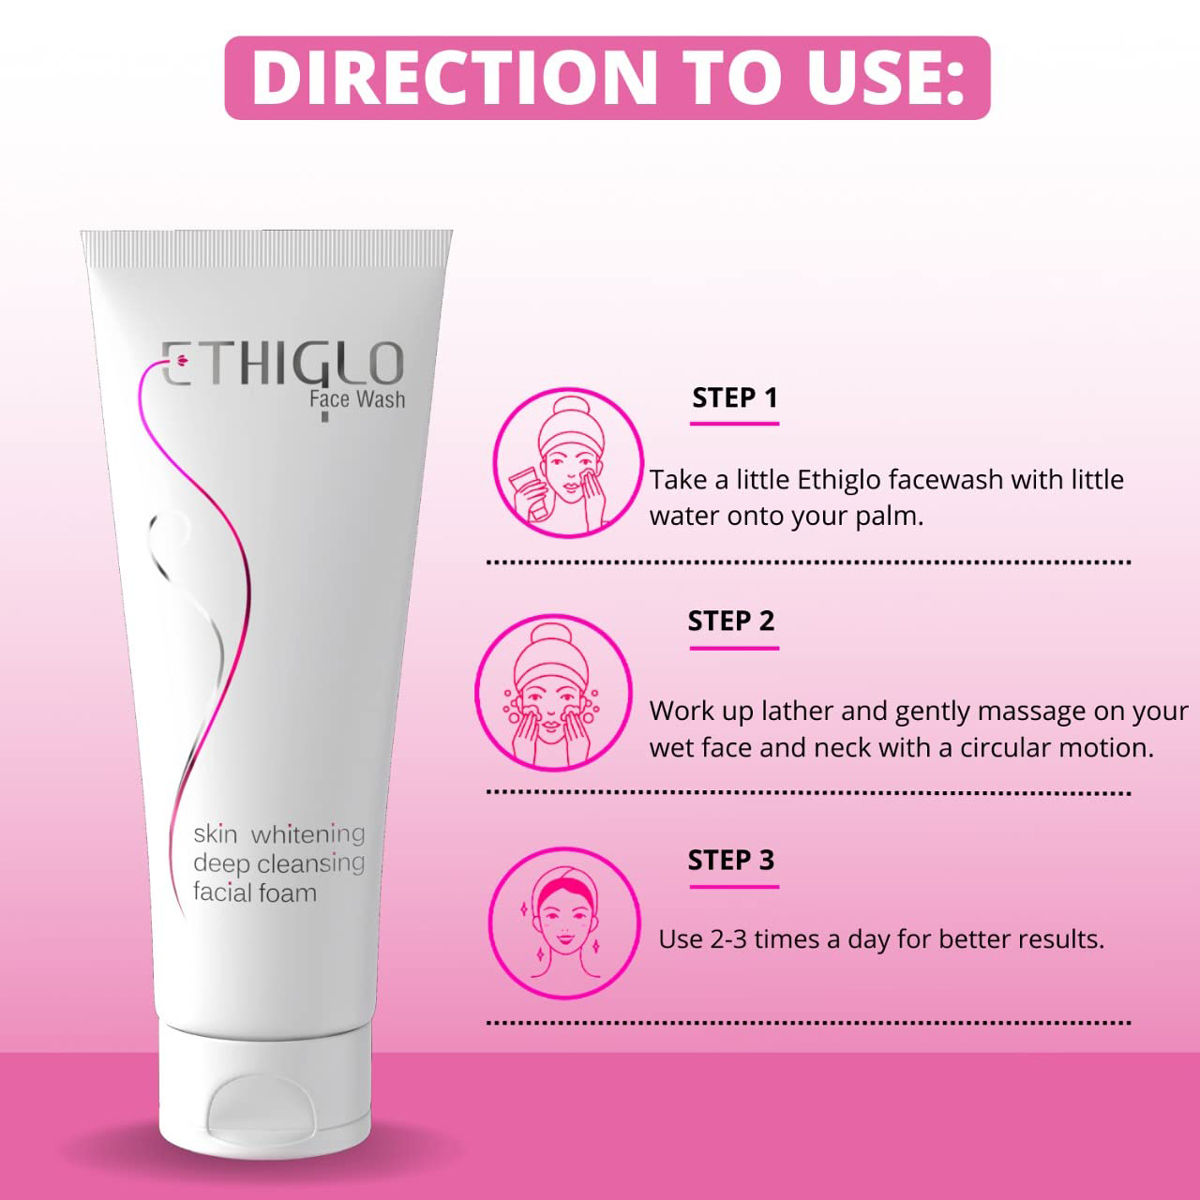 Ethiglo Skin Whitening Deep Cleansing Facial Foam Face Wash, 70 ml, Pack of 1 